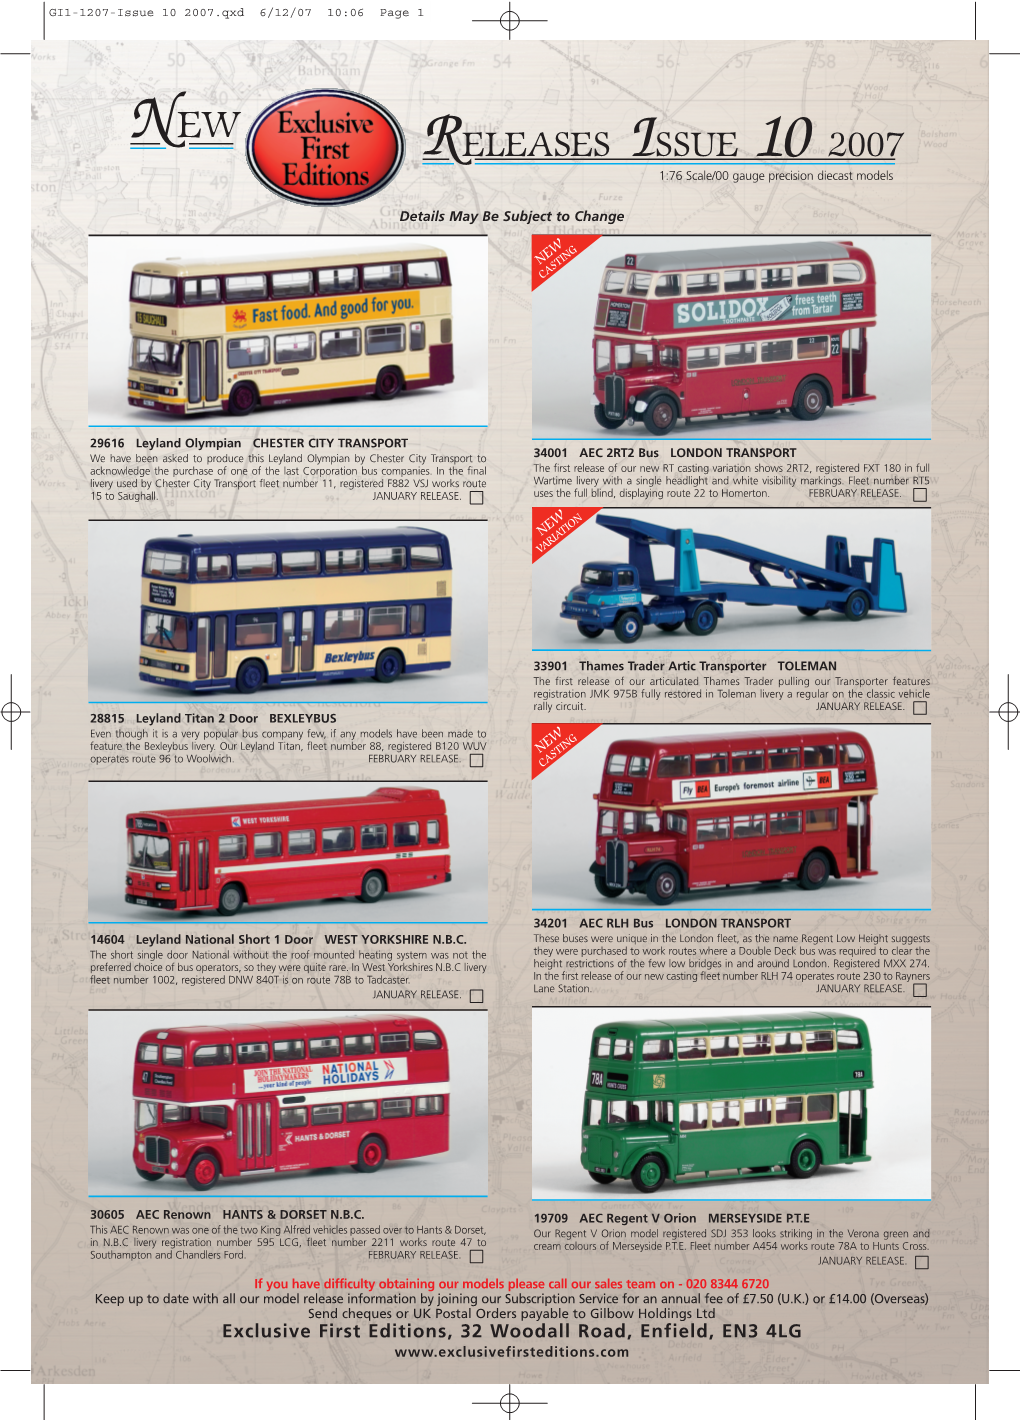 RELEASES ISSUE 10 2007 1:76 Scale/00 Gauge Precision Diecast Models